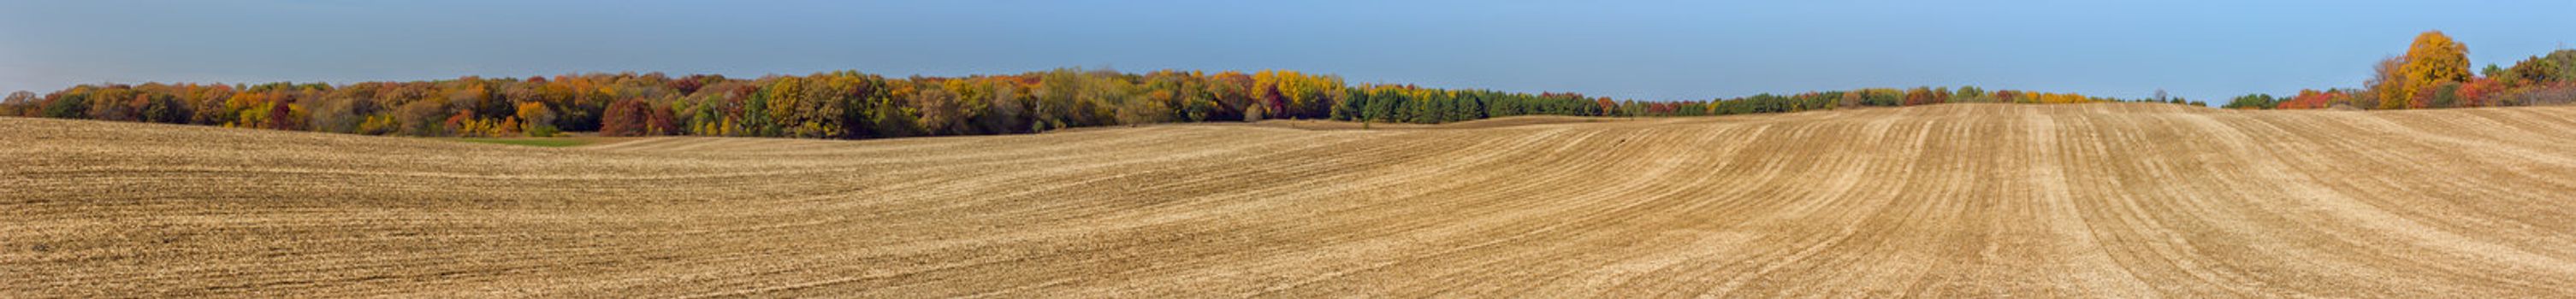 Panorama of a Plowed Field in Autumn